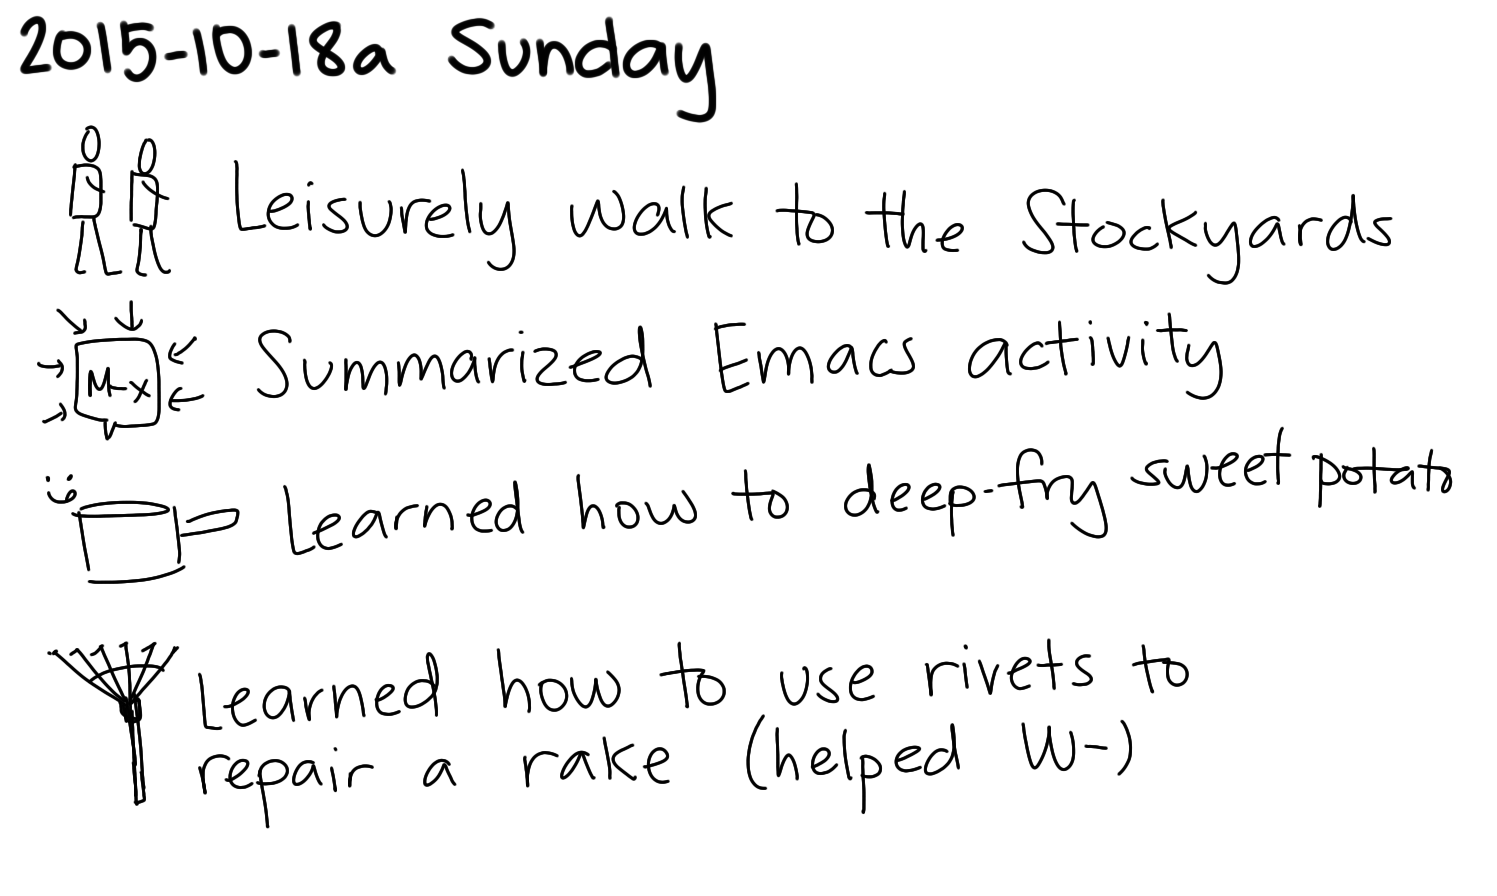 2015-10-18a Sunday -- index card #journal.png